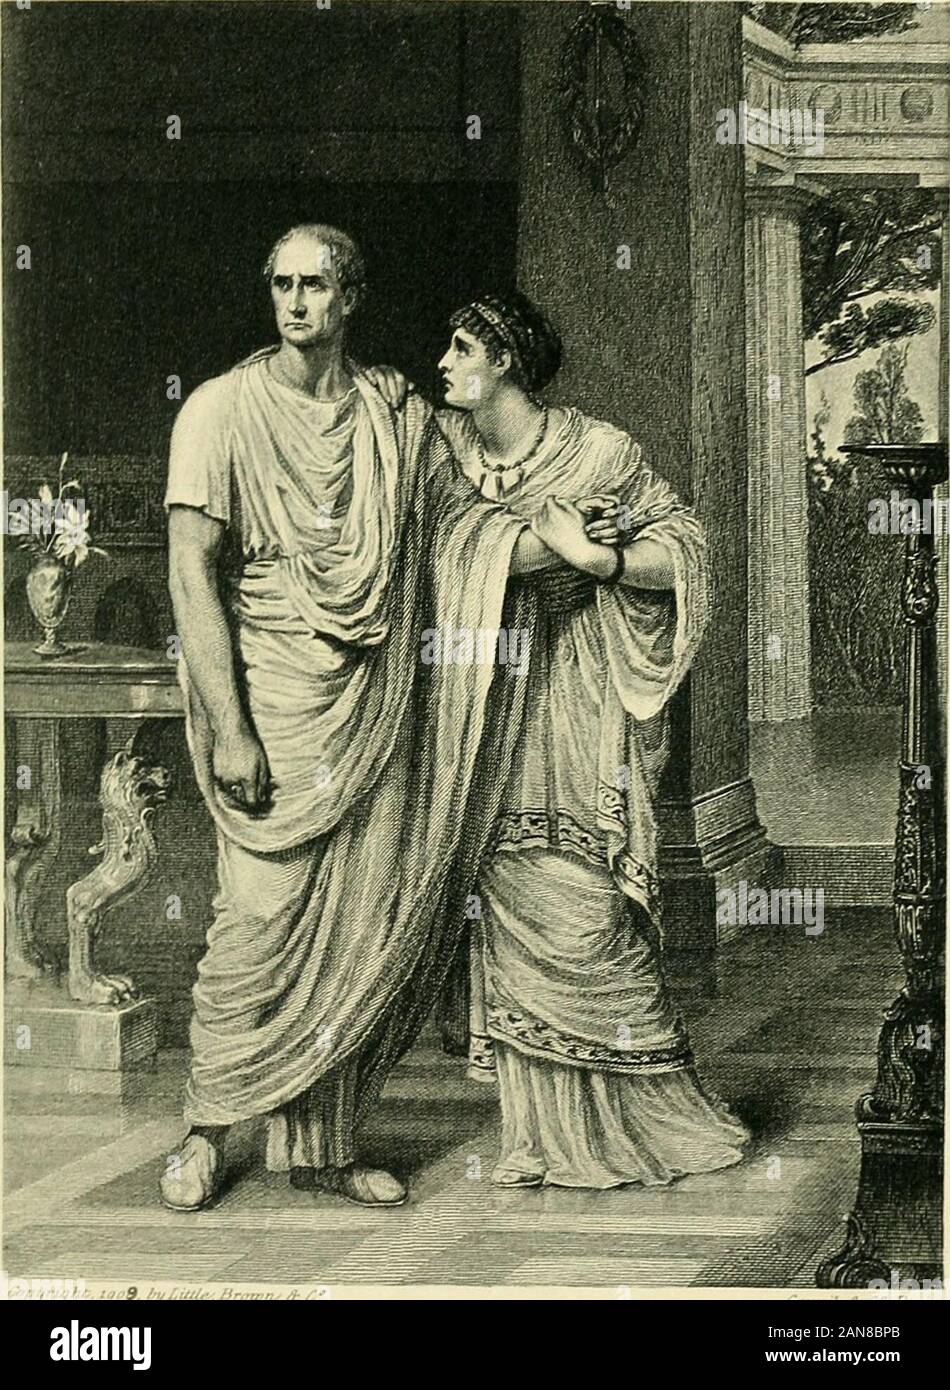 Gallery of Shakespeare illustrations, from celebrated works of art . CAESAR AND CALPURNIA From an engraving by J. Bauer, after the painting byFrank Dicksee JuMus Caesar, Act 11, Sc. ii •rjjfli; .•lOiir.H .. (t ^ii ytfAn( iiiiJ.) I ,t.. THE DEATH OF CAESAR From the painting by Gerome Julius Caesar, Act III, Sc. i in/ 1(1 11 &gt;&lt; All JjA .kah Stock Photo